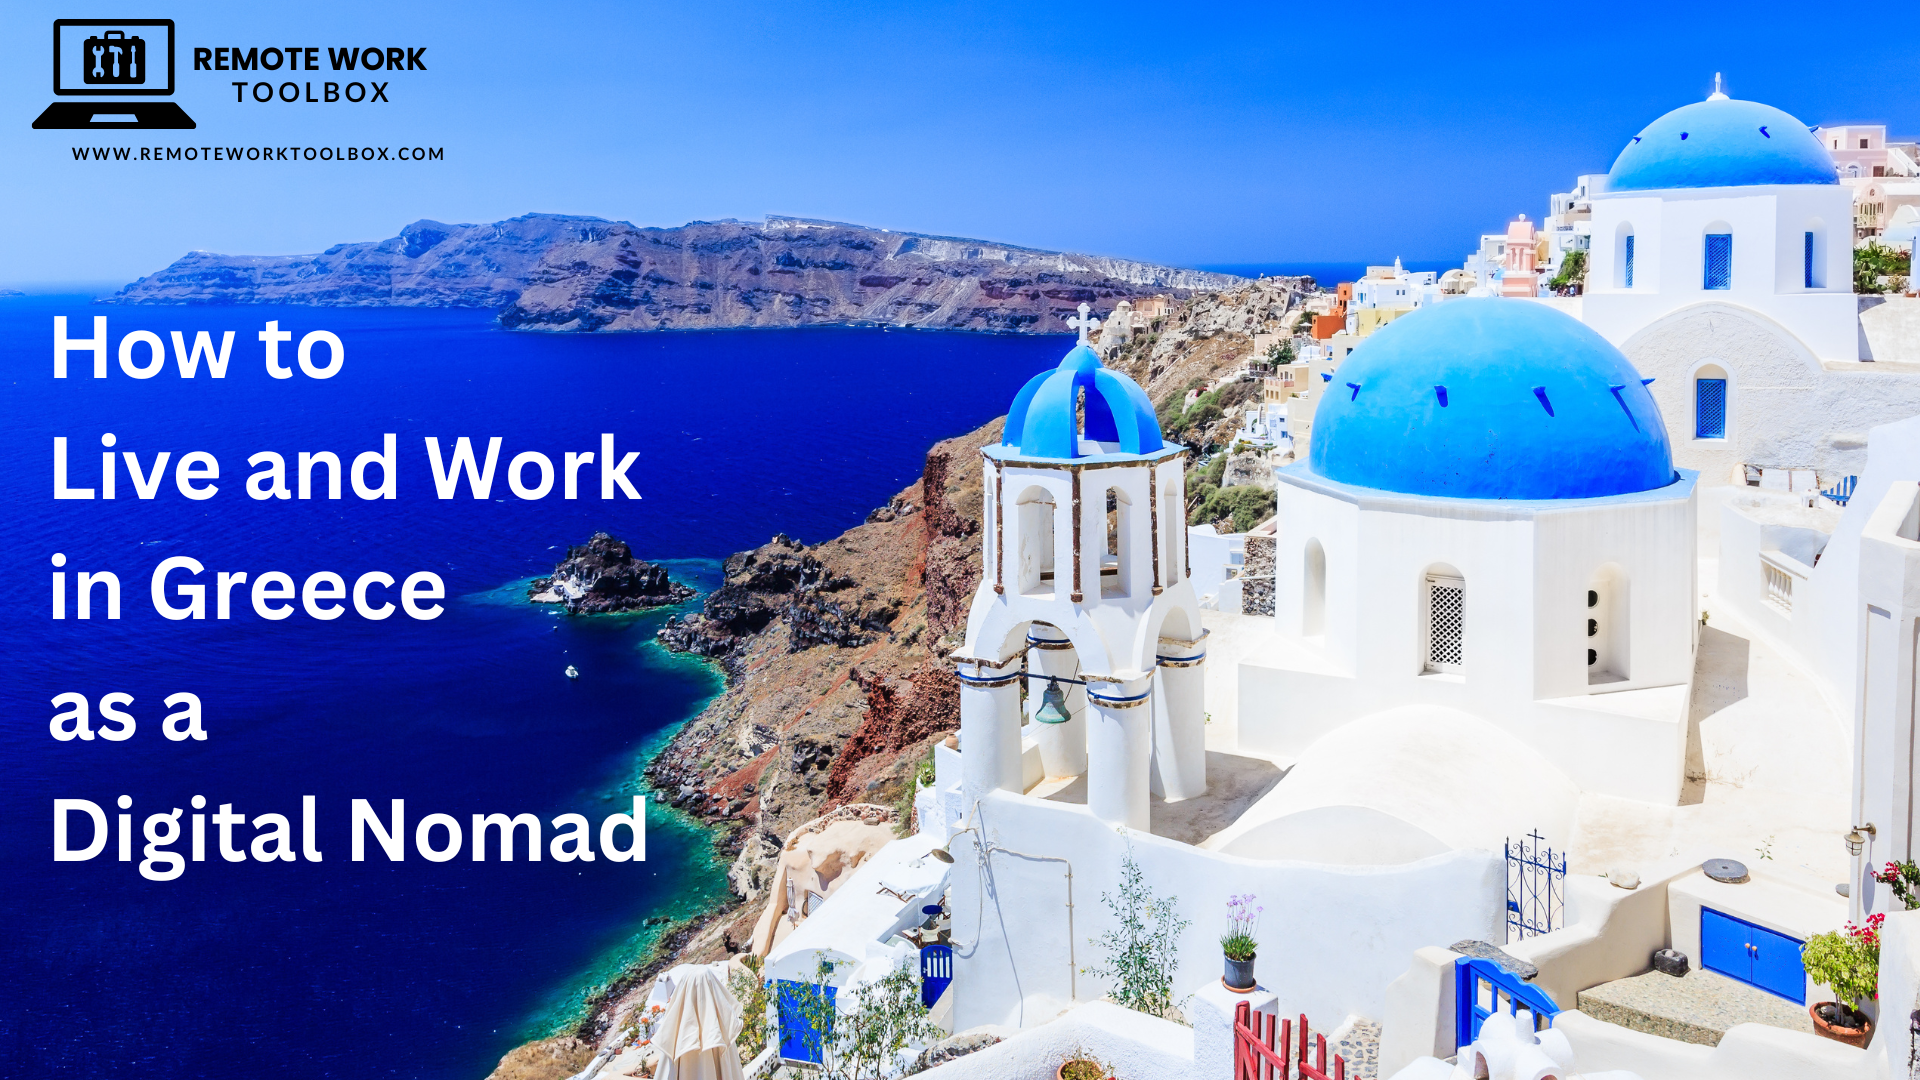 How to Live and Work in Greece as a Digital Nomad